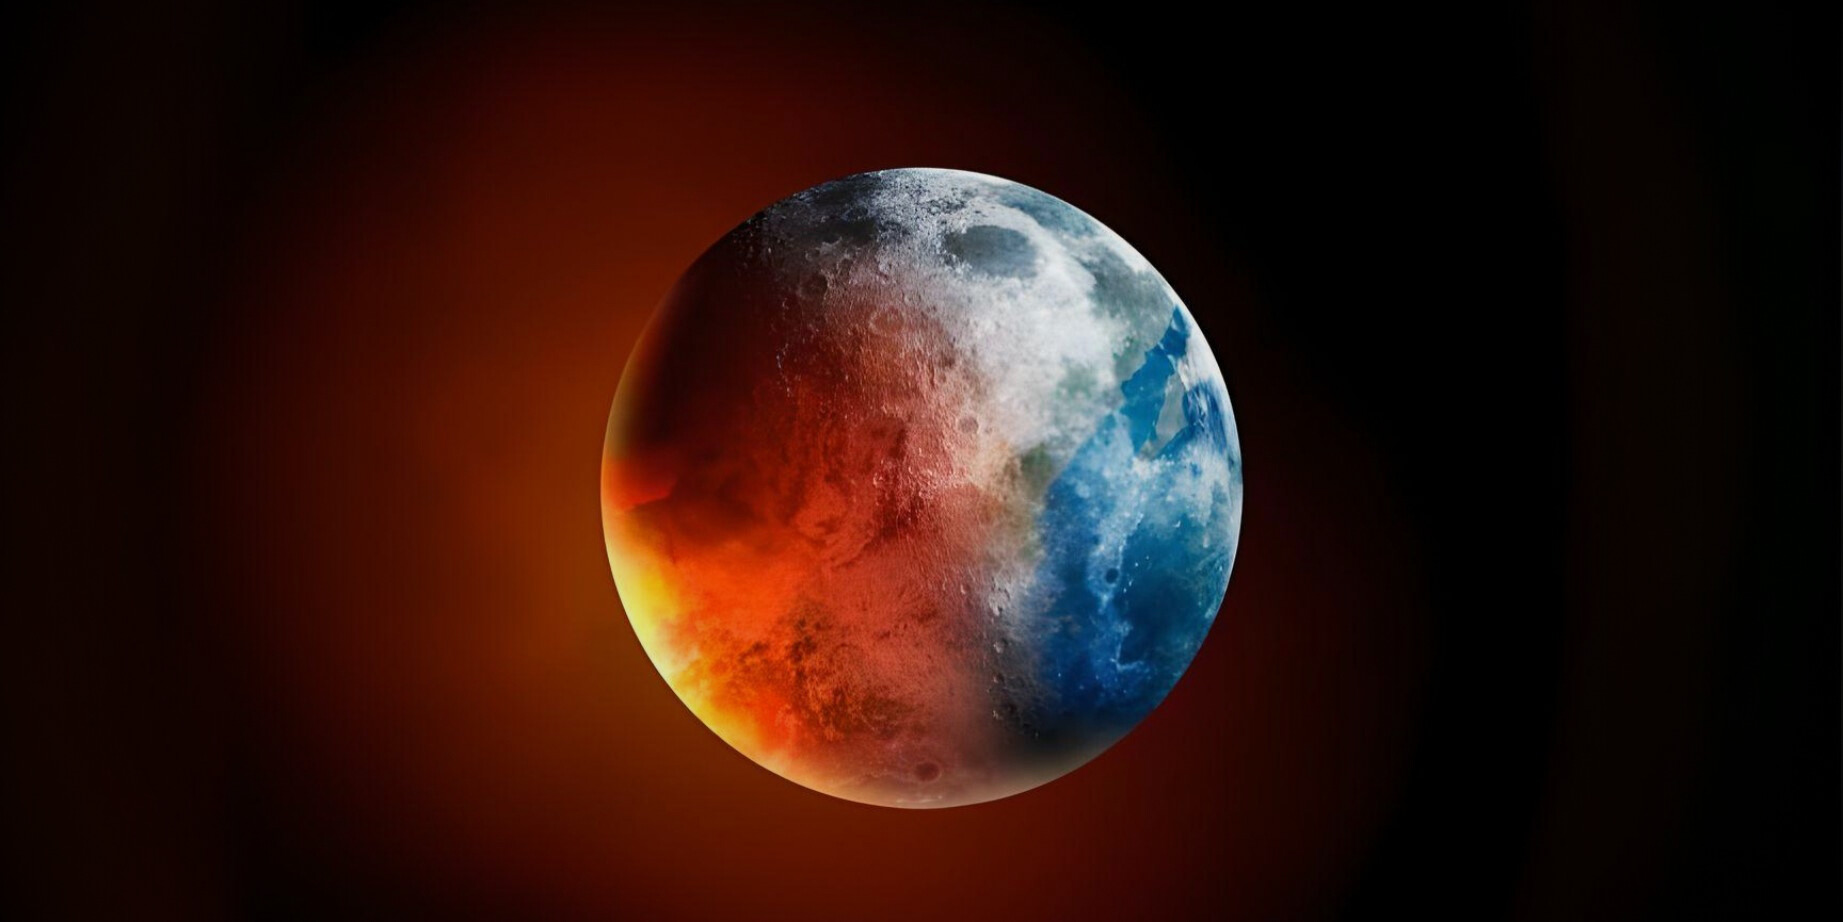 The Earth, scorching hot and red on one side and freezing cold on the other side, representing the effects of global boiling.